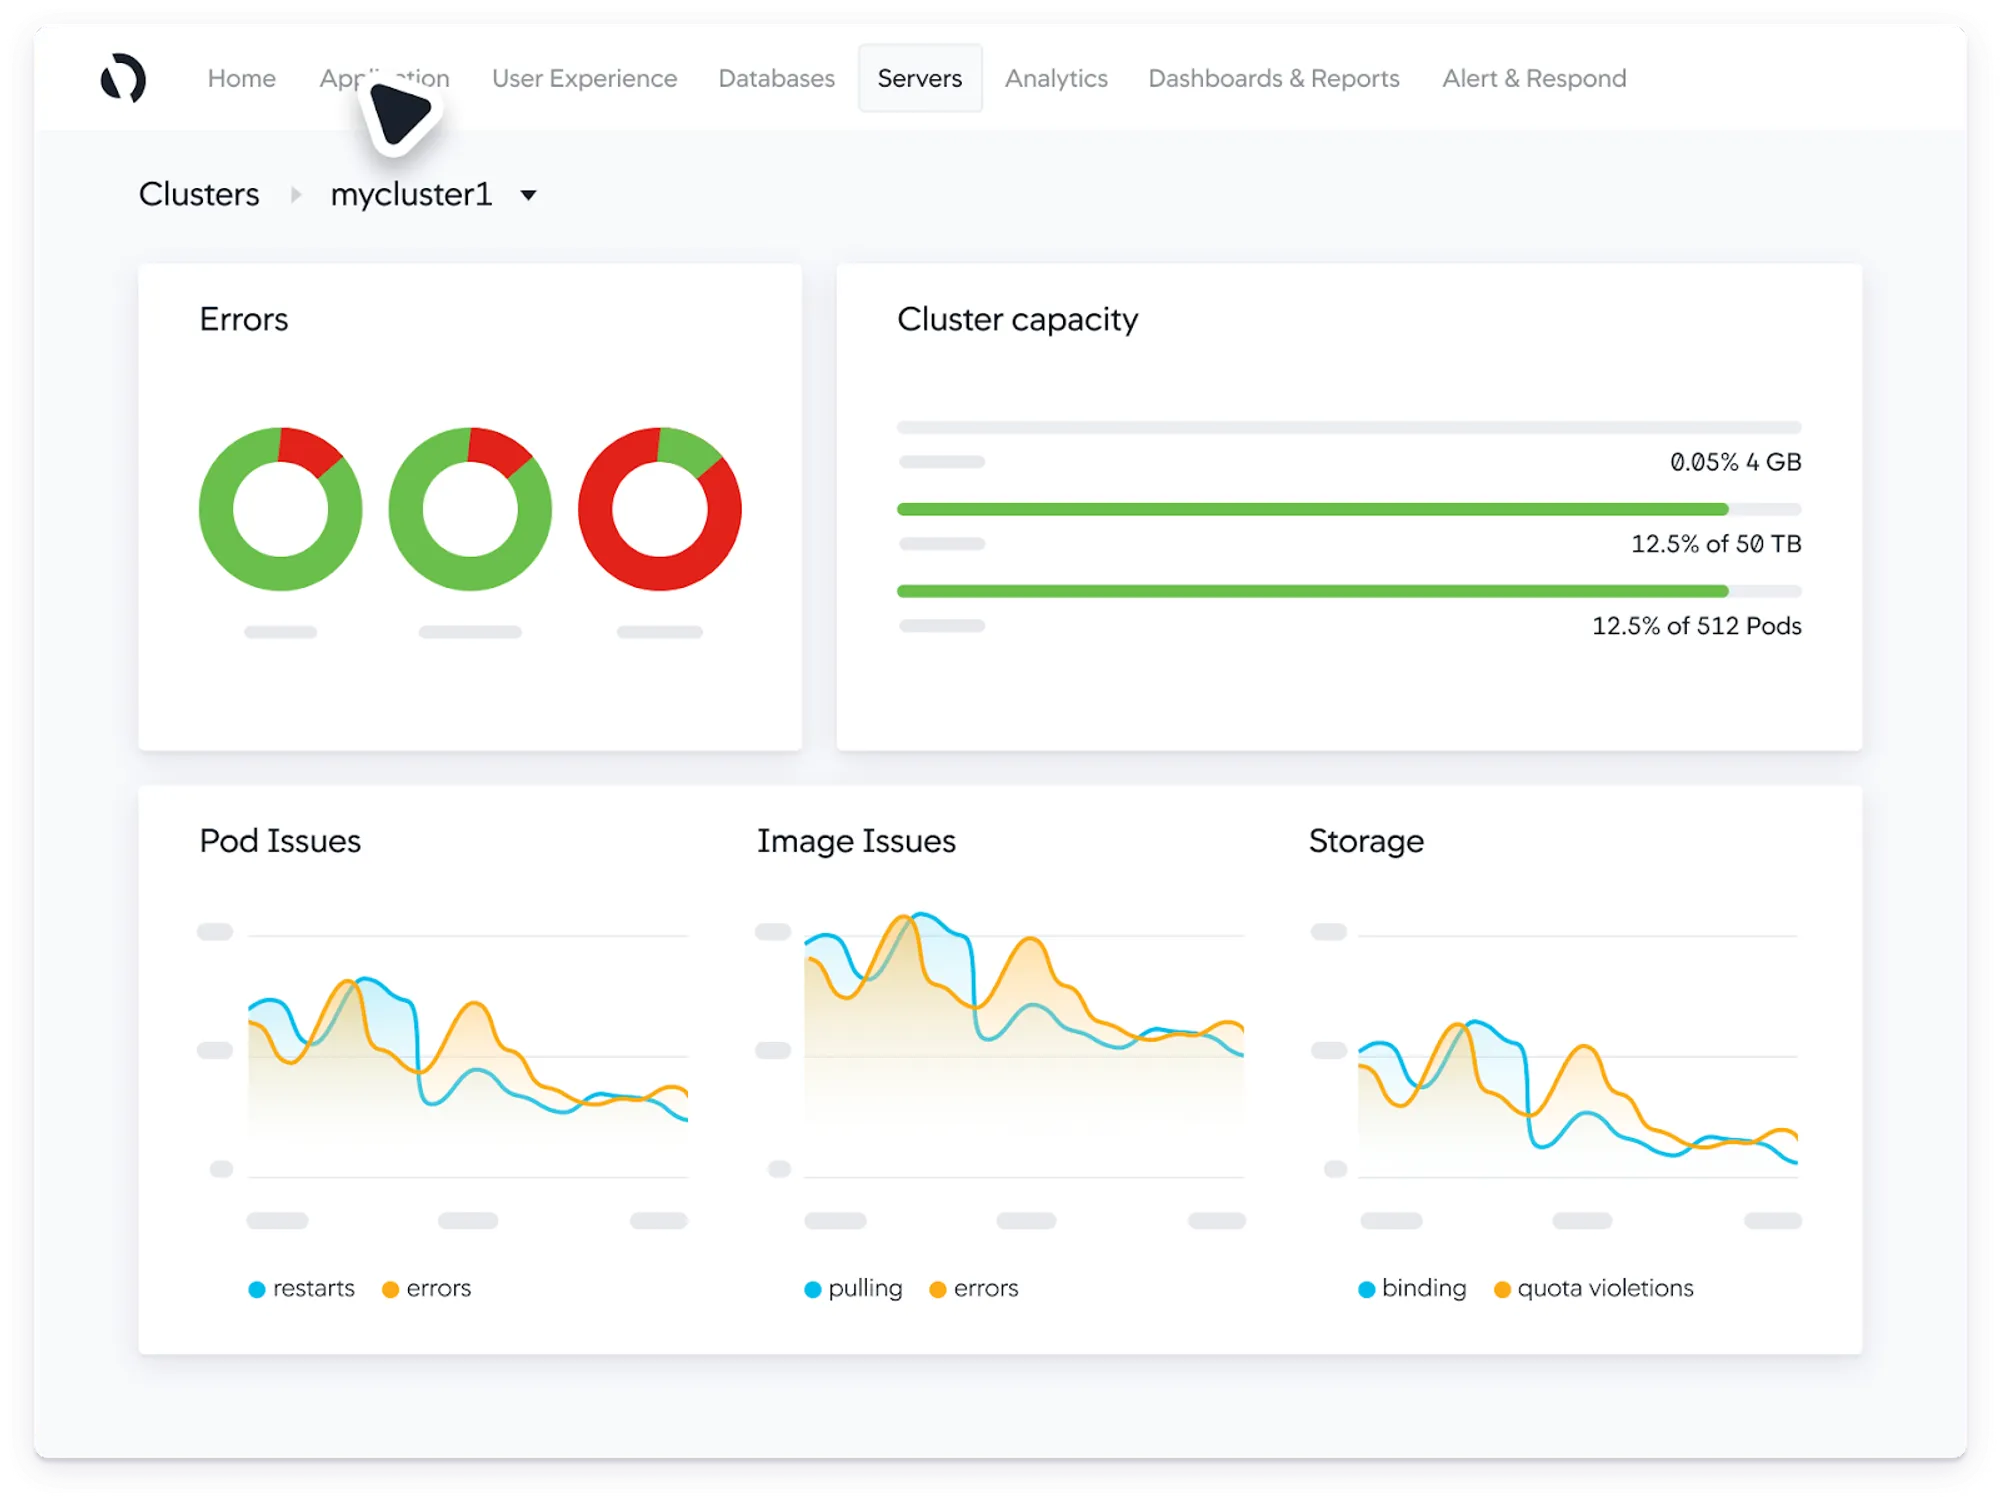 Infrastructure monitoring dashboard in AppDynamics